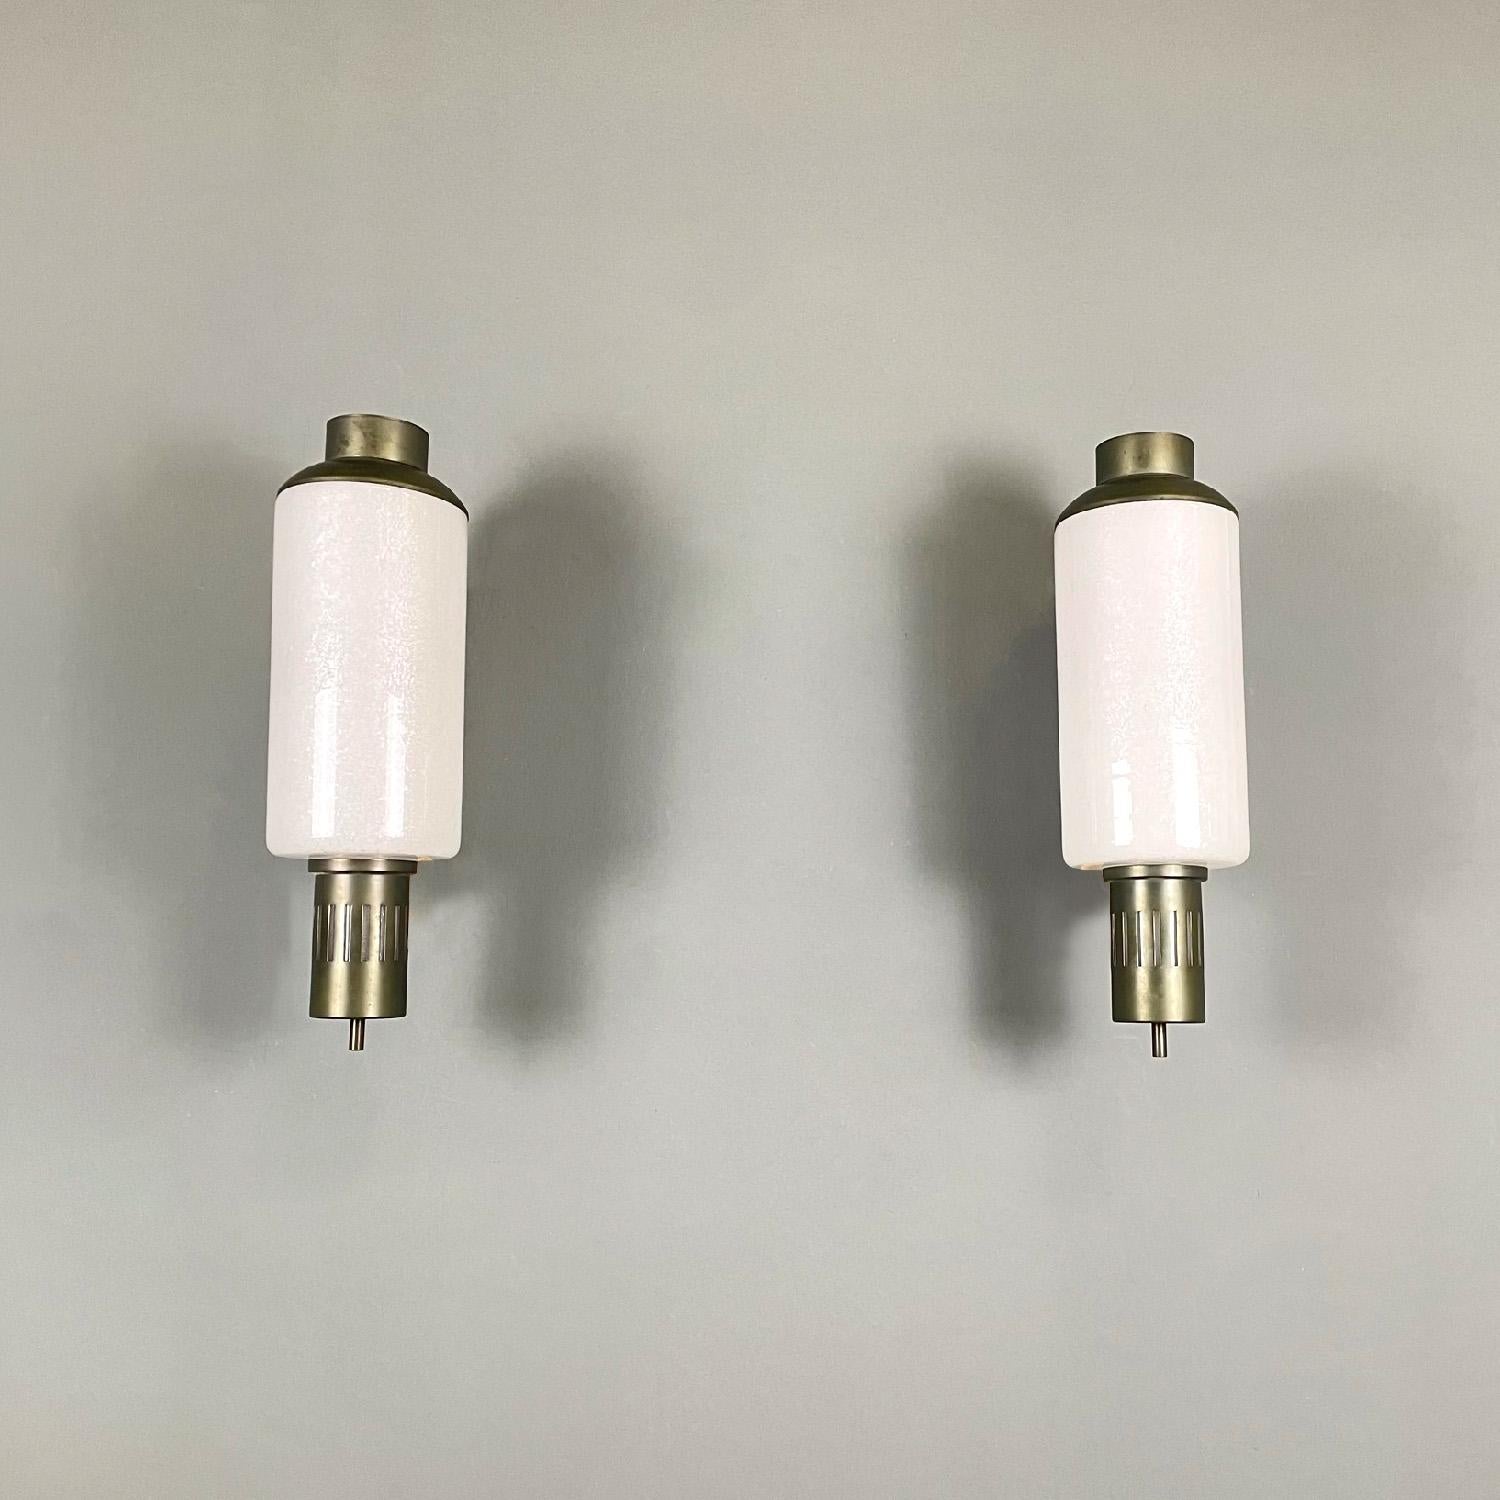 Italian mid-century modern Murano white glass and brass Reggiani appliques 1960s
Pair of wall lights with a round base. The structure is in brass and is composed of a curved arm to which the white Murano glass diffuser is connected. The diffuser is